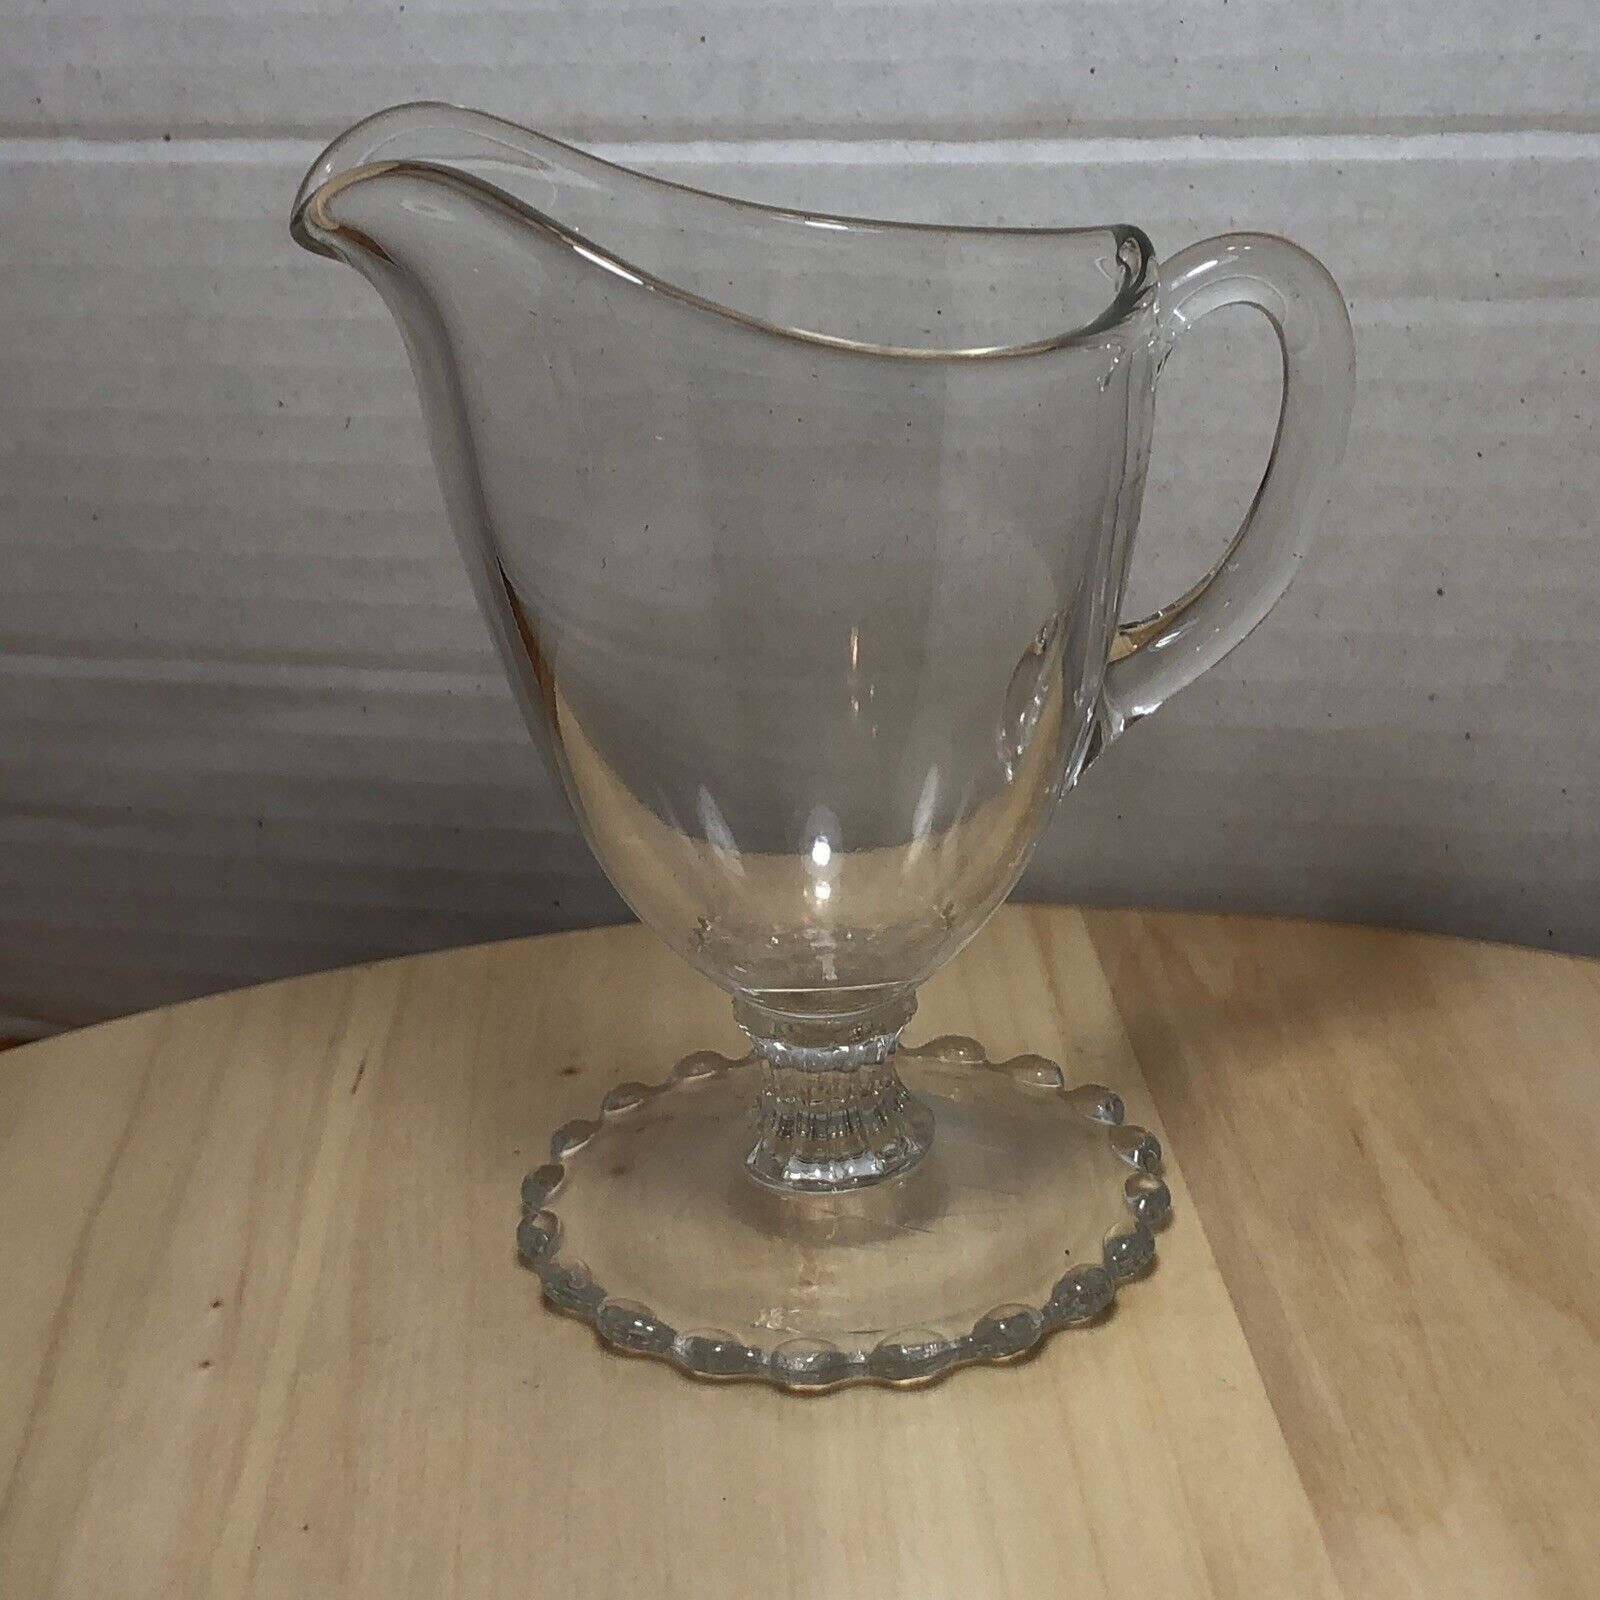 Candlewick Creamer Imperial Glass of Bellair Ohio Pattern